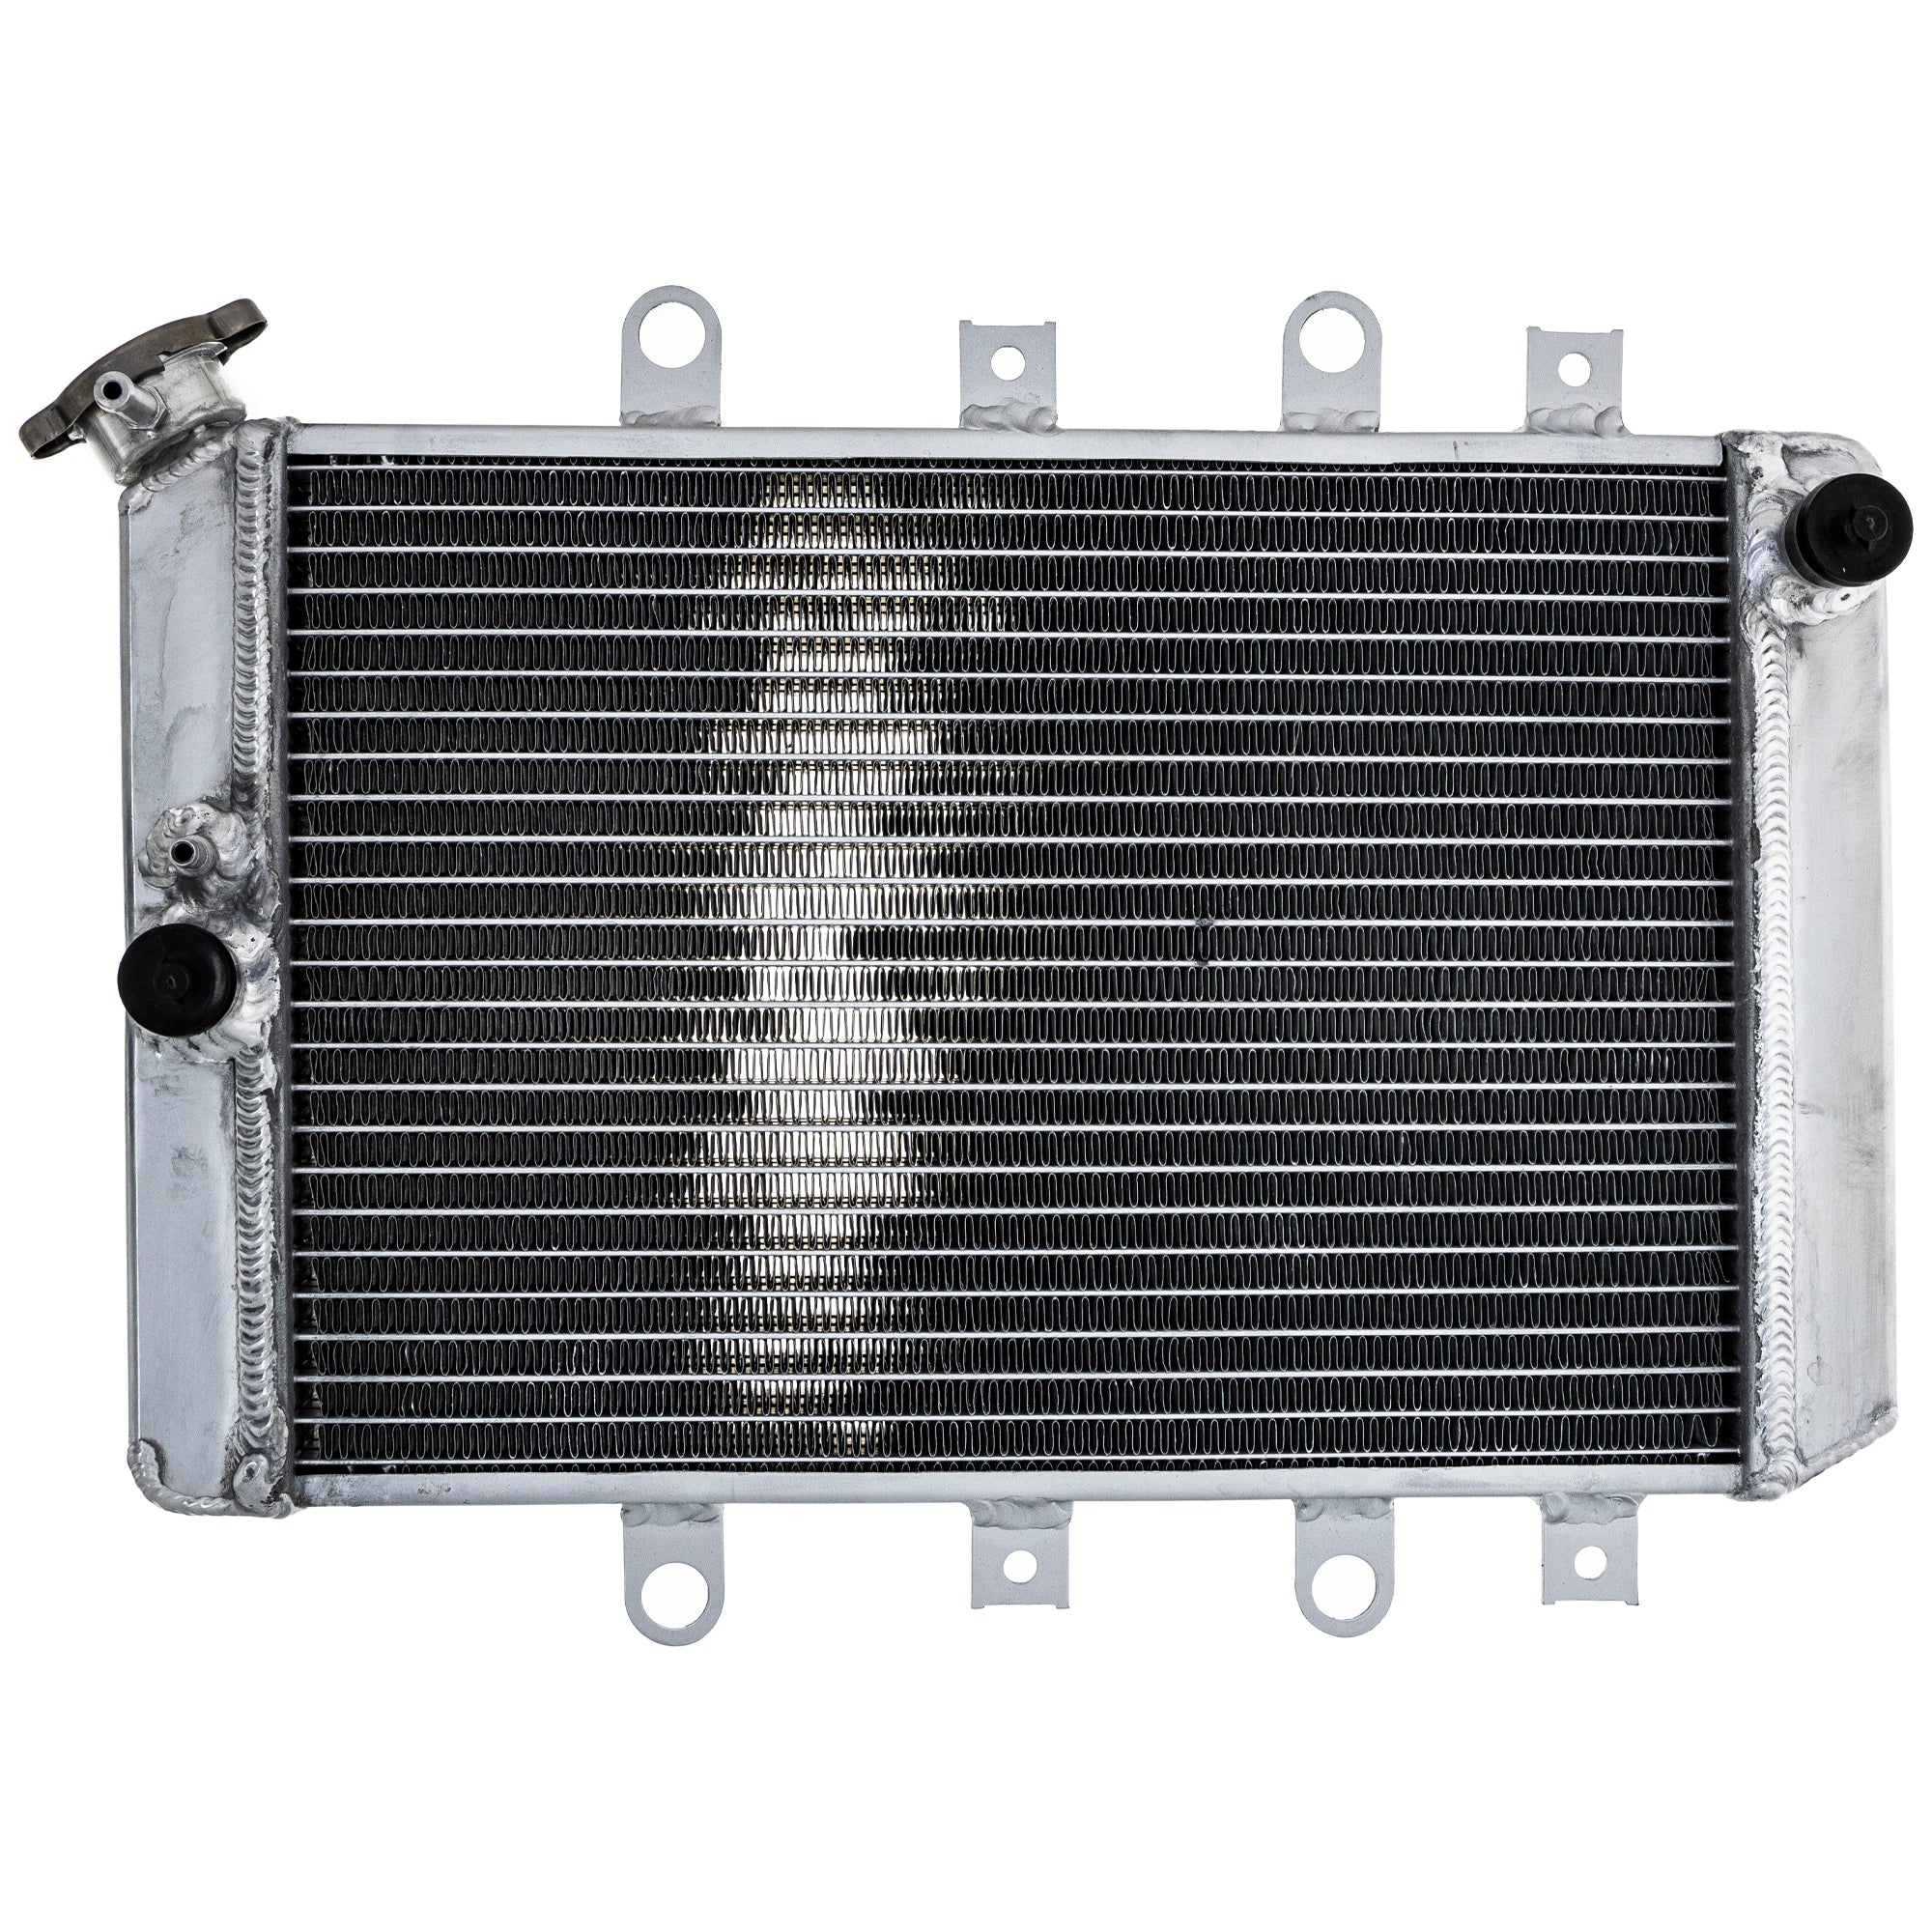 Radiator for Yamaha Grizzly 550 700 YFM550FG 1HP-E2460-00-00 with Cap